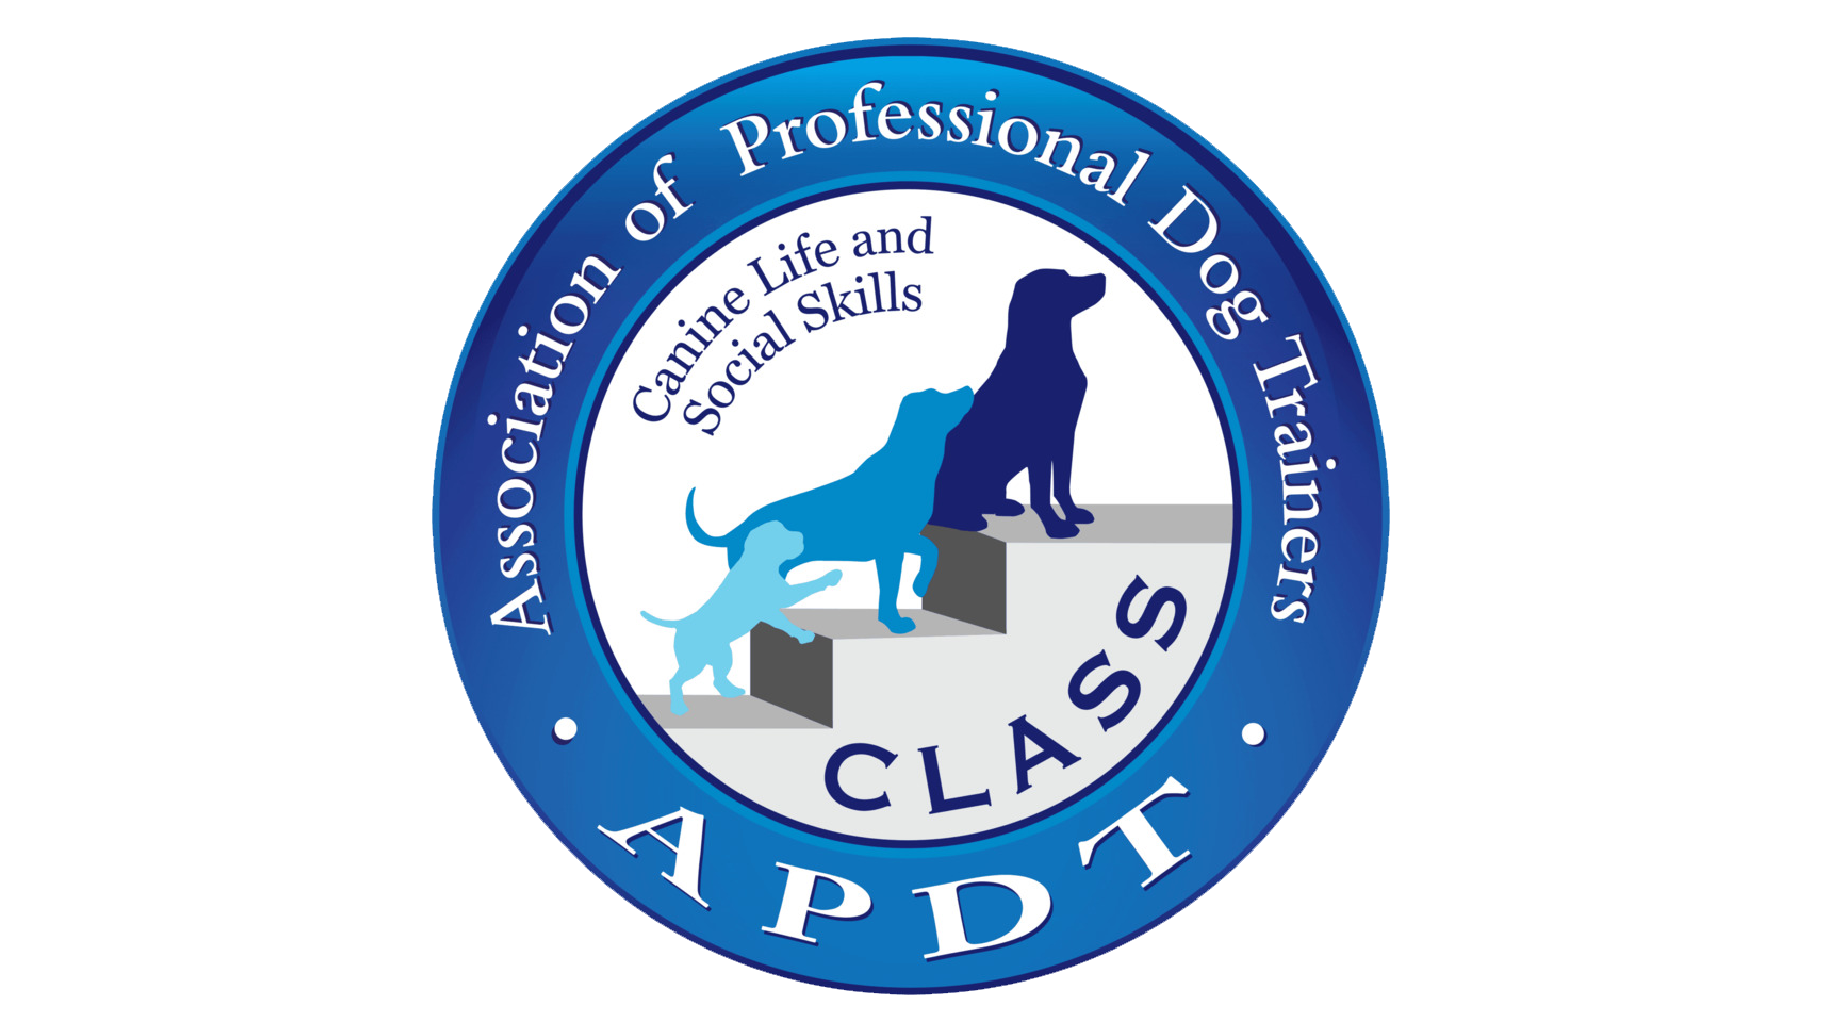 ruff-house-dog-park-association-of-professional-dog-trainers-logo.png